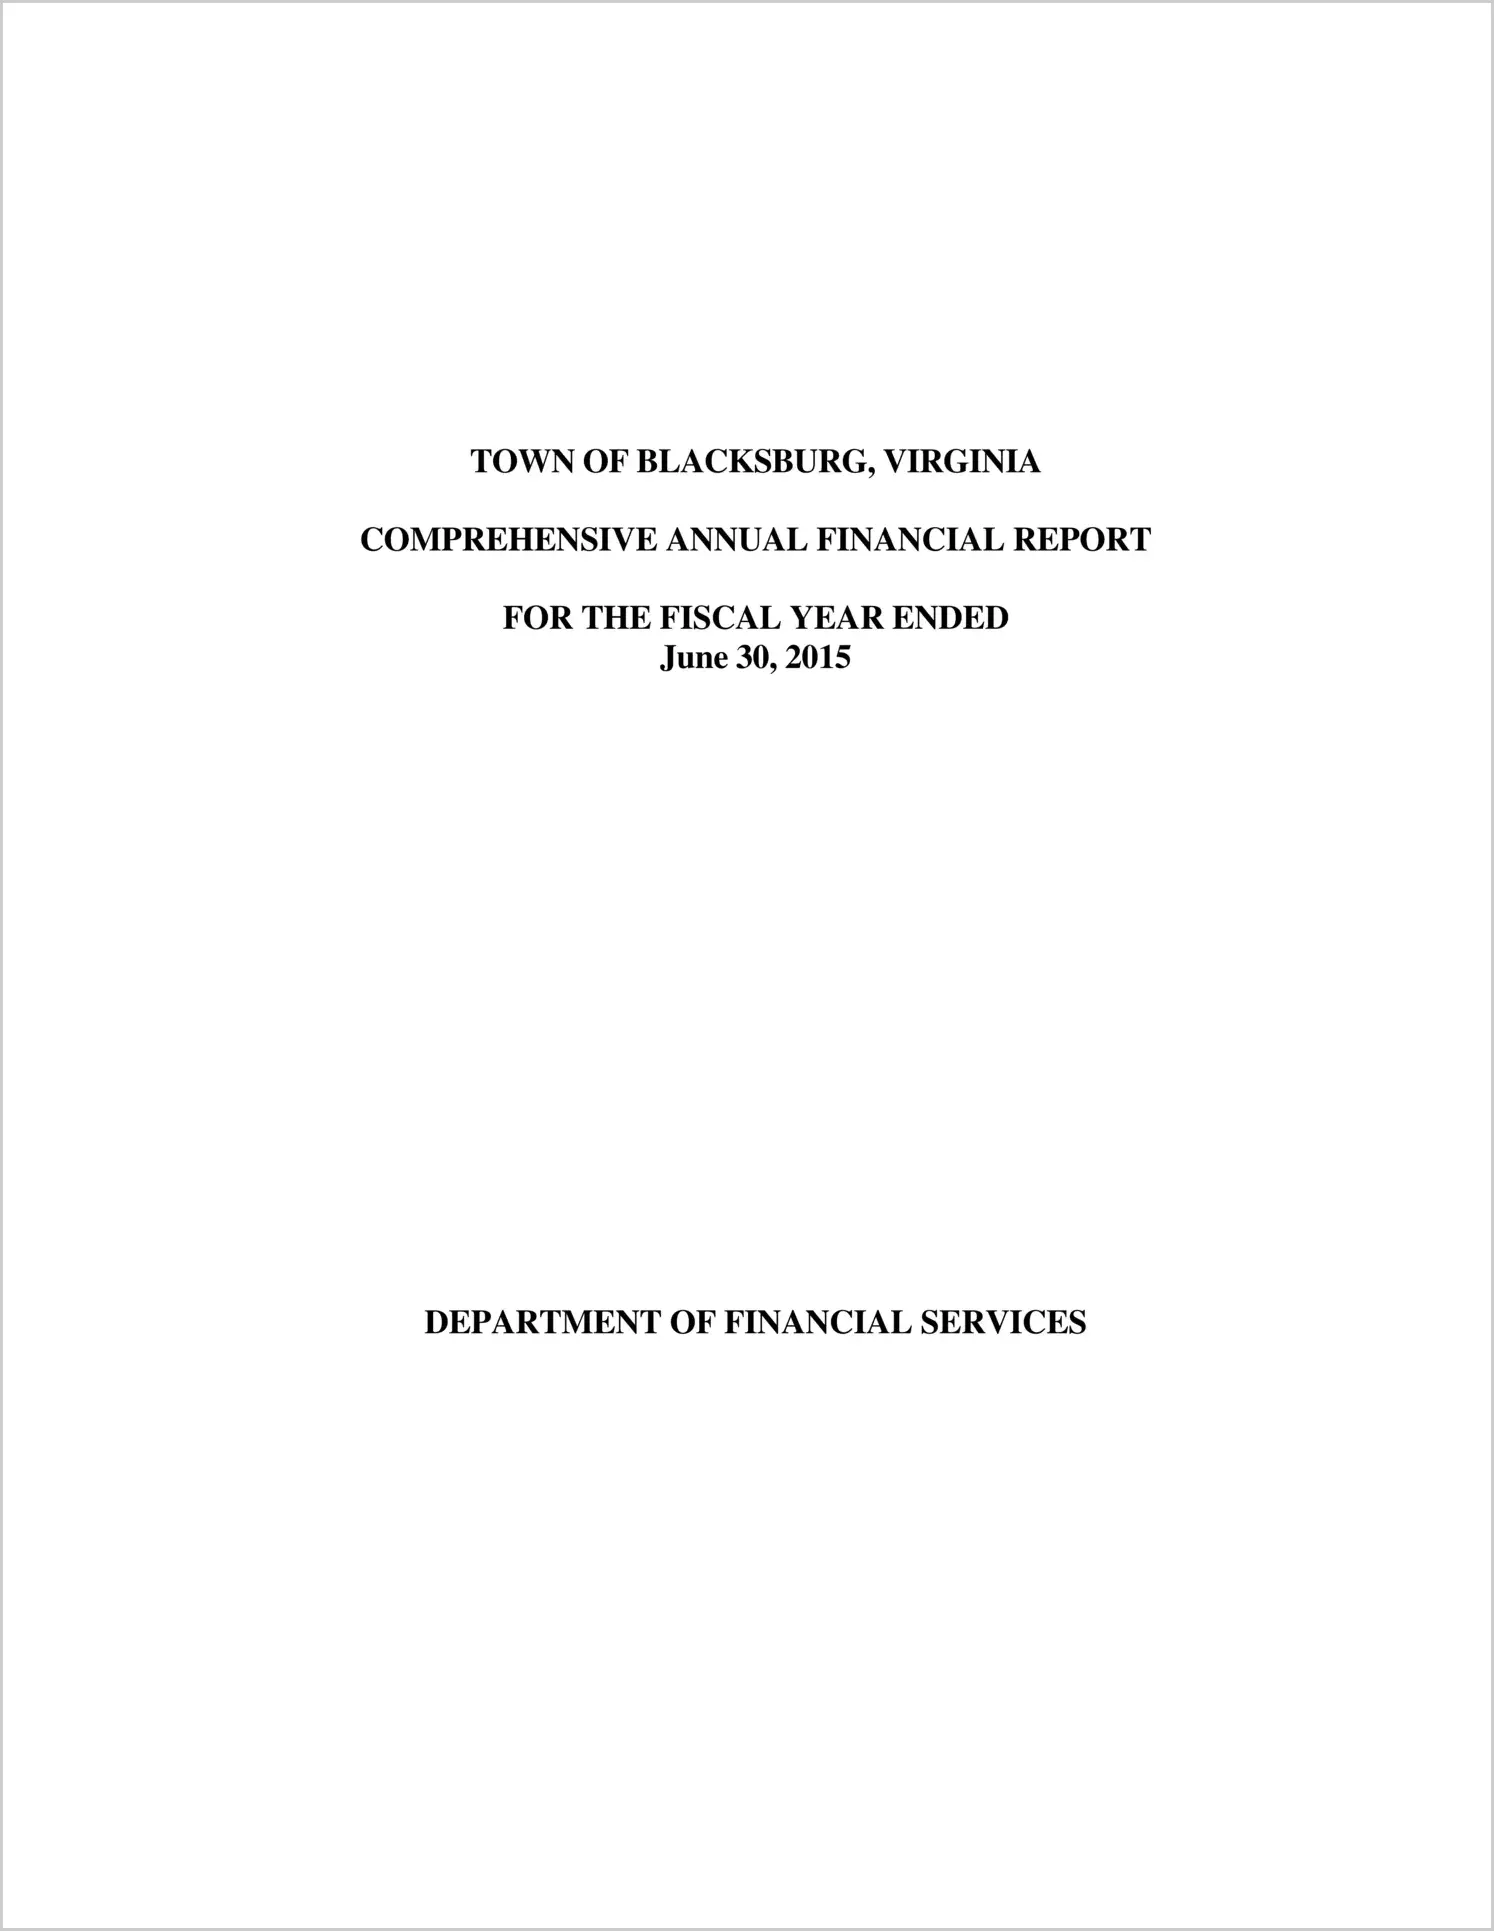 2015 Annual Financial Report for Town of Blacksburg